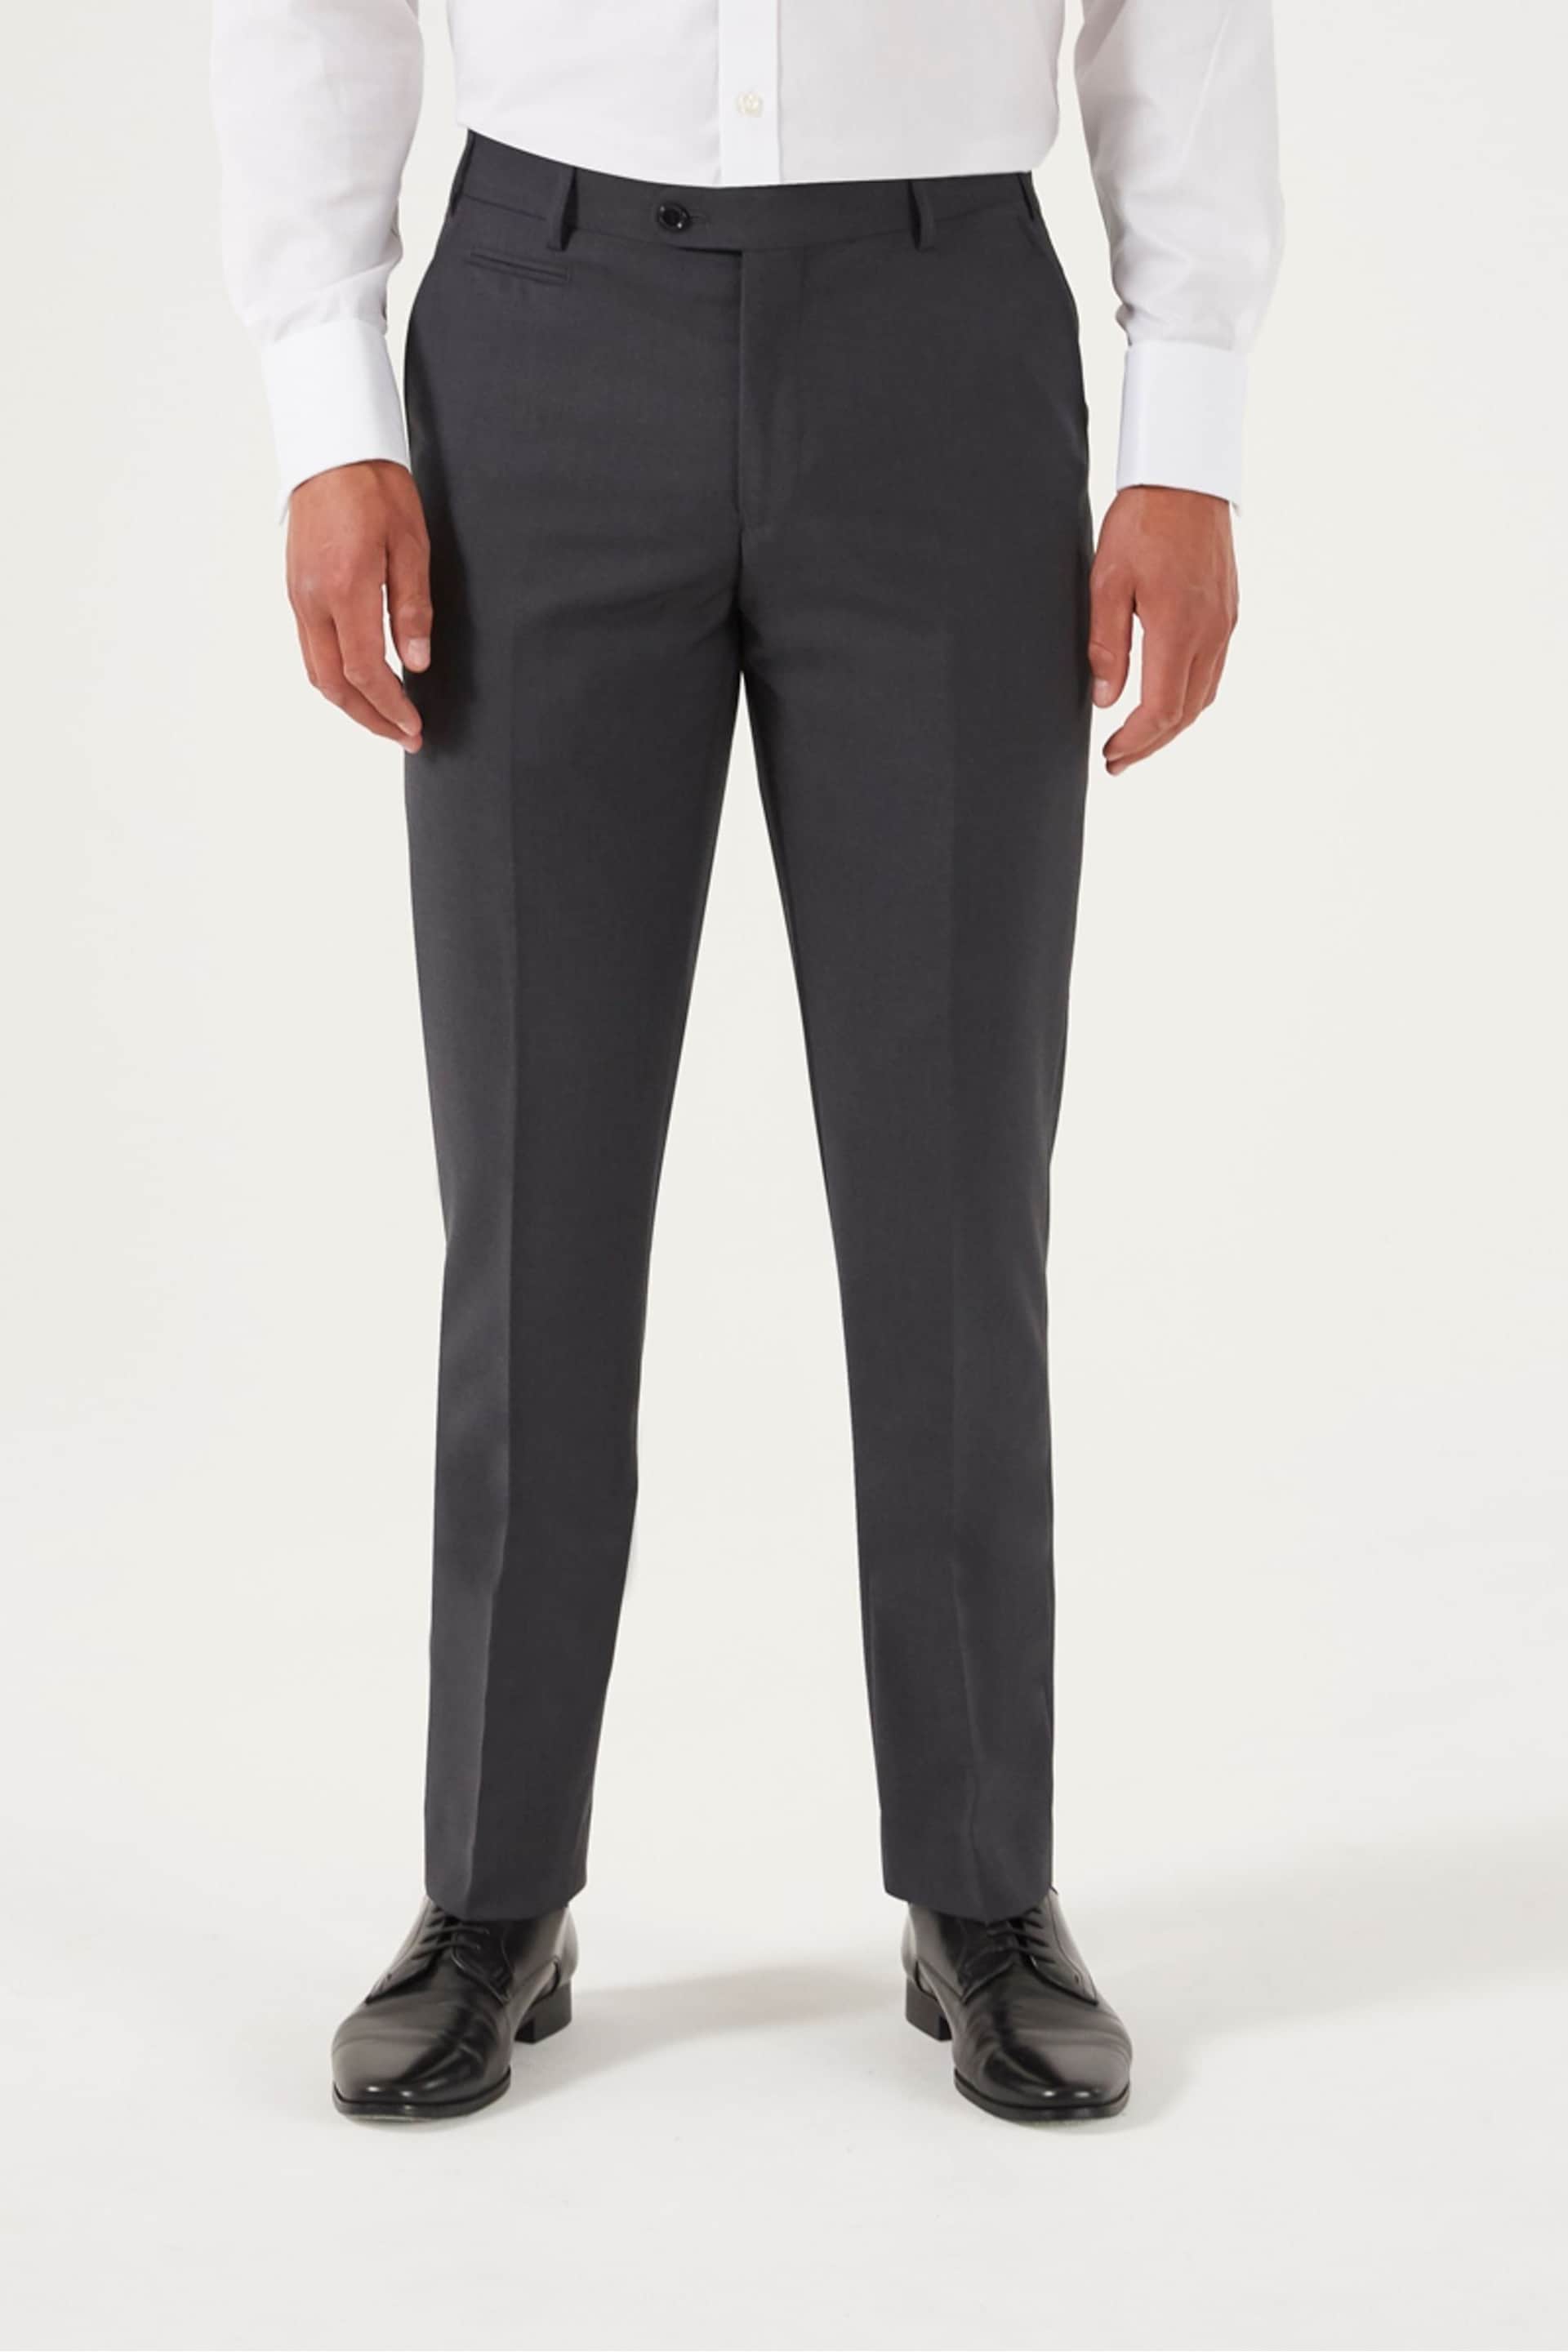 Skopes Tailored Fit Grey Madrid Charcoal Suit Trousers - Image 1 of 4